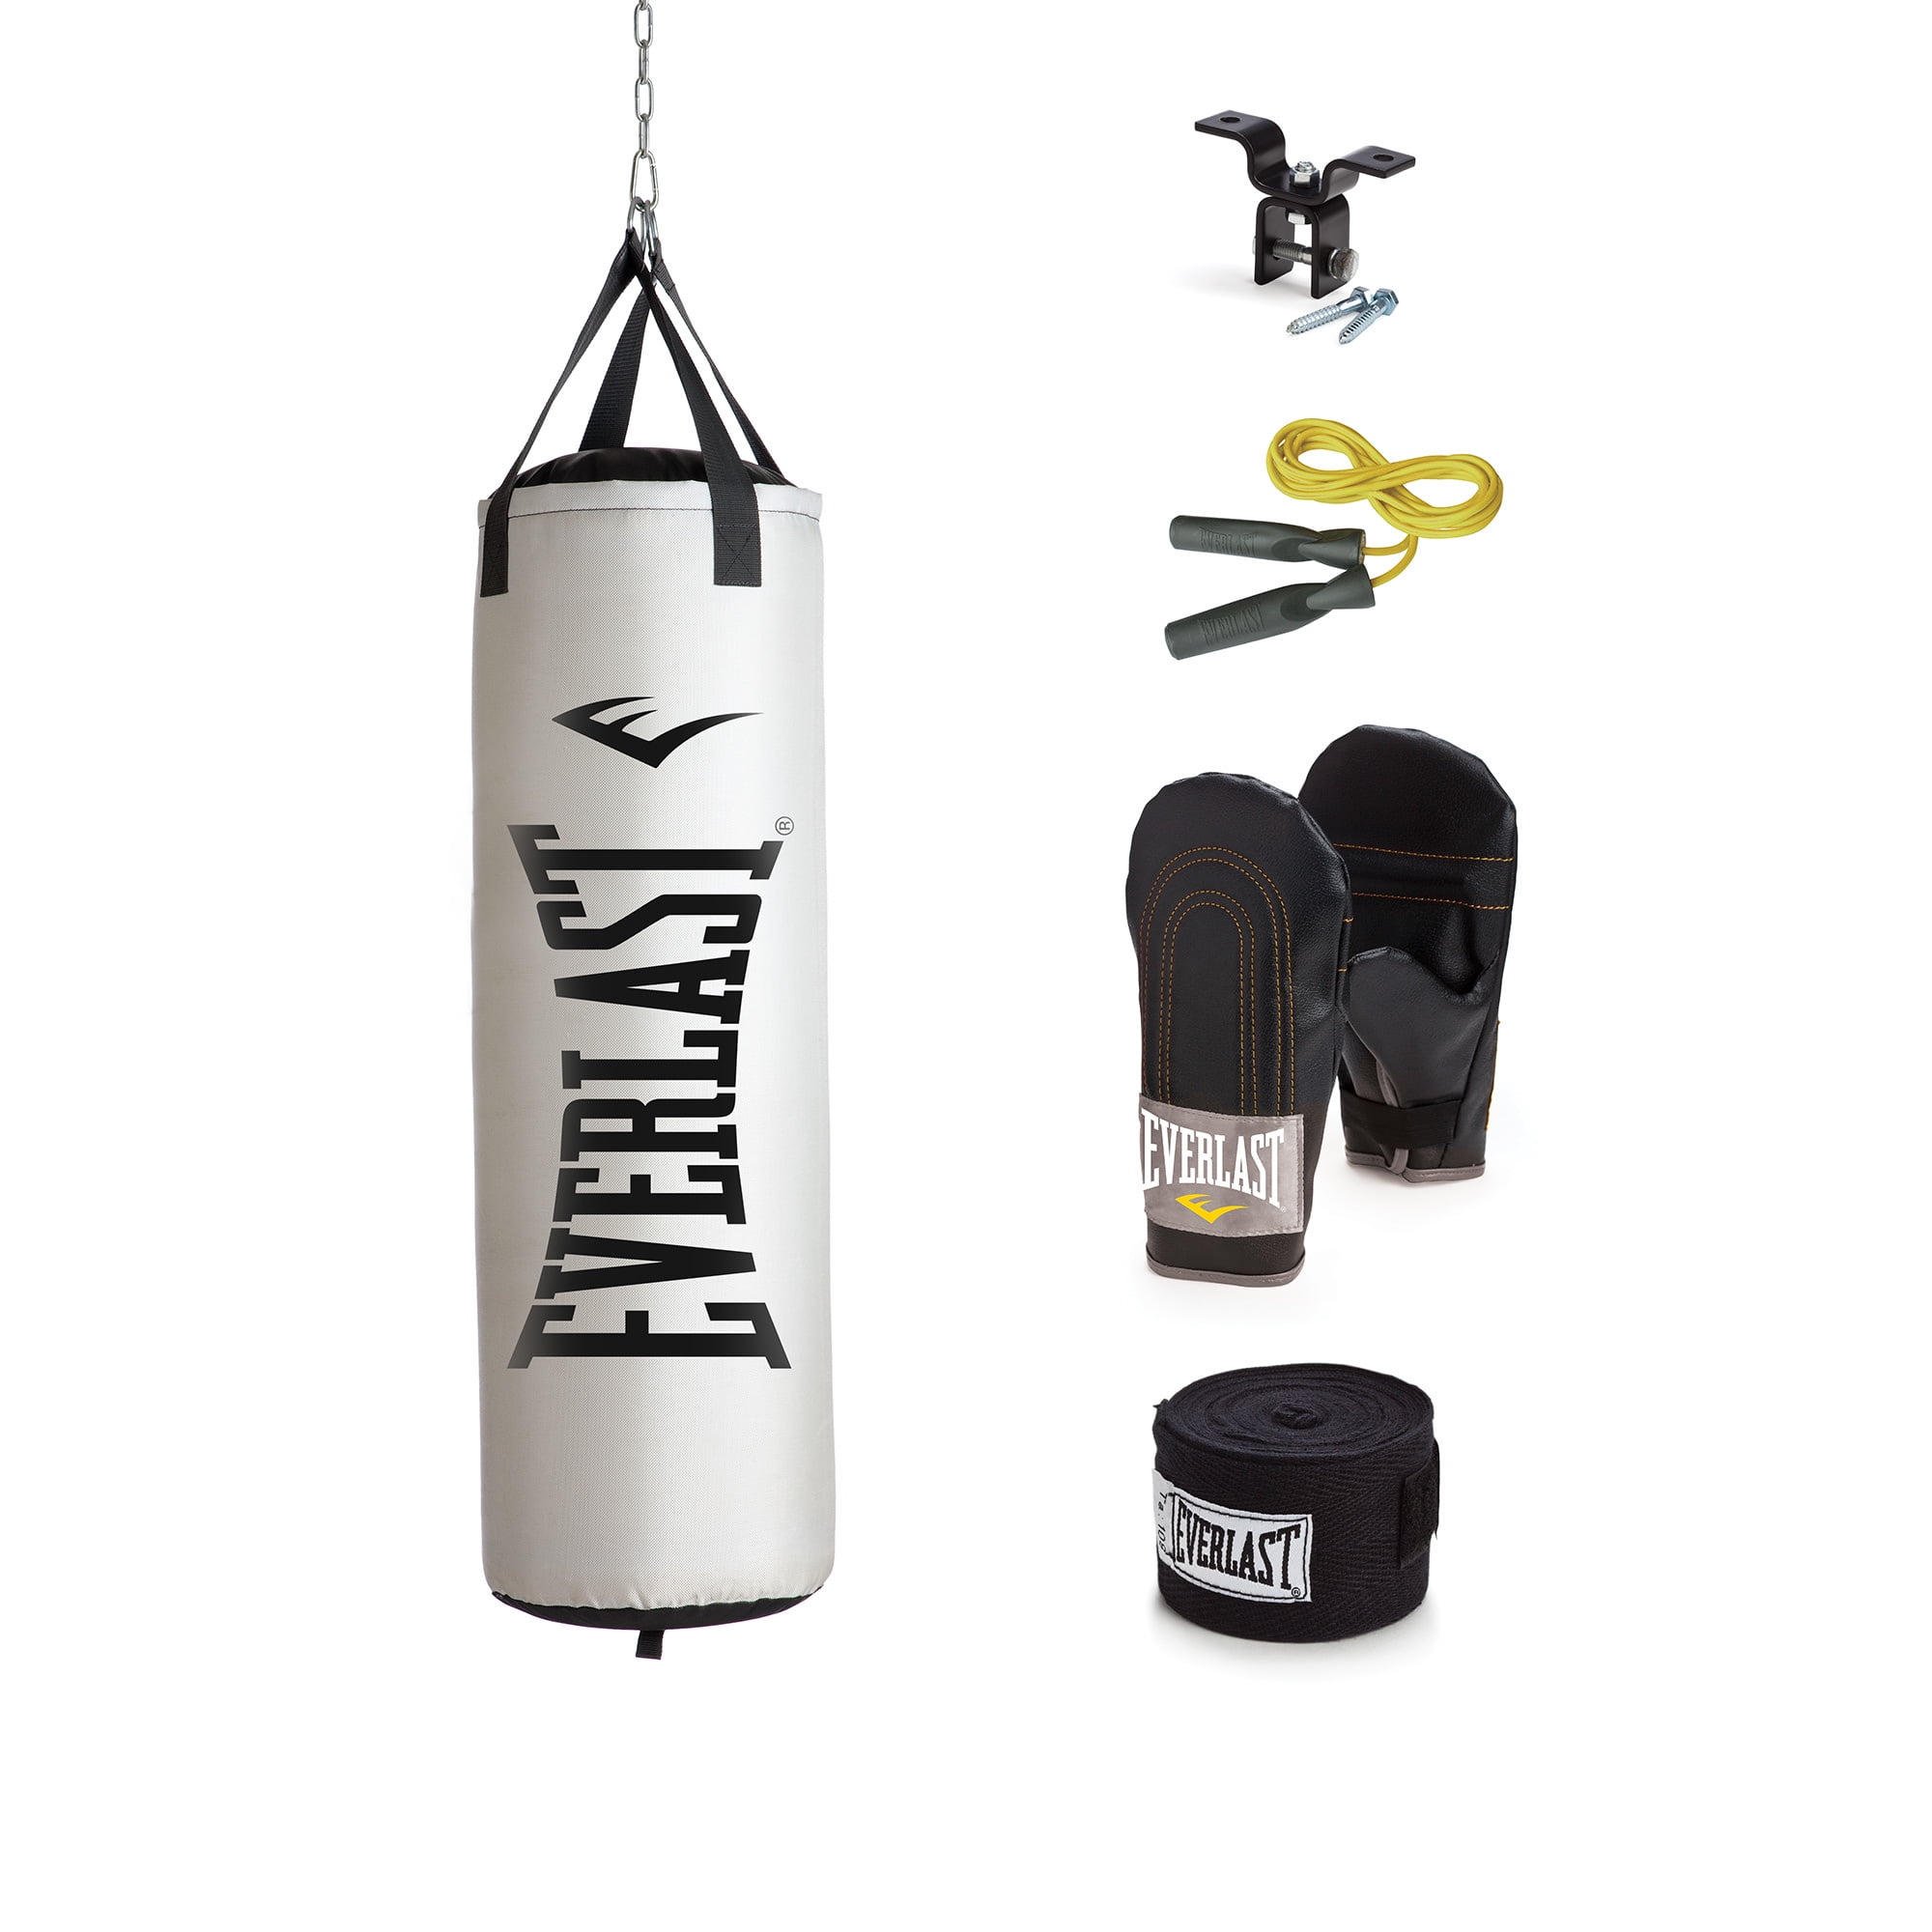 Amazon.com : Everlast - 2 Station Heavy Bag Stand : Heavy Punching Bags :  Sports & Outdoors